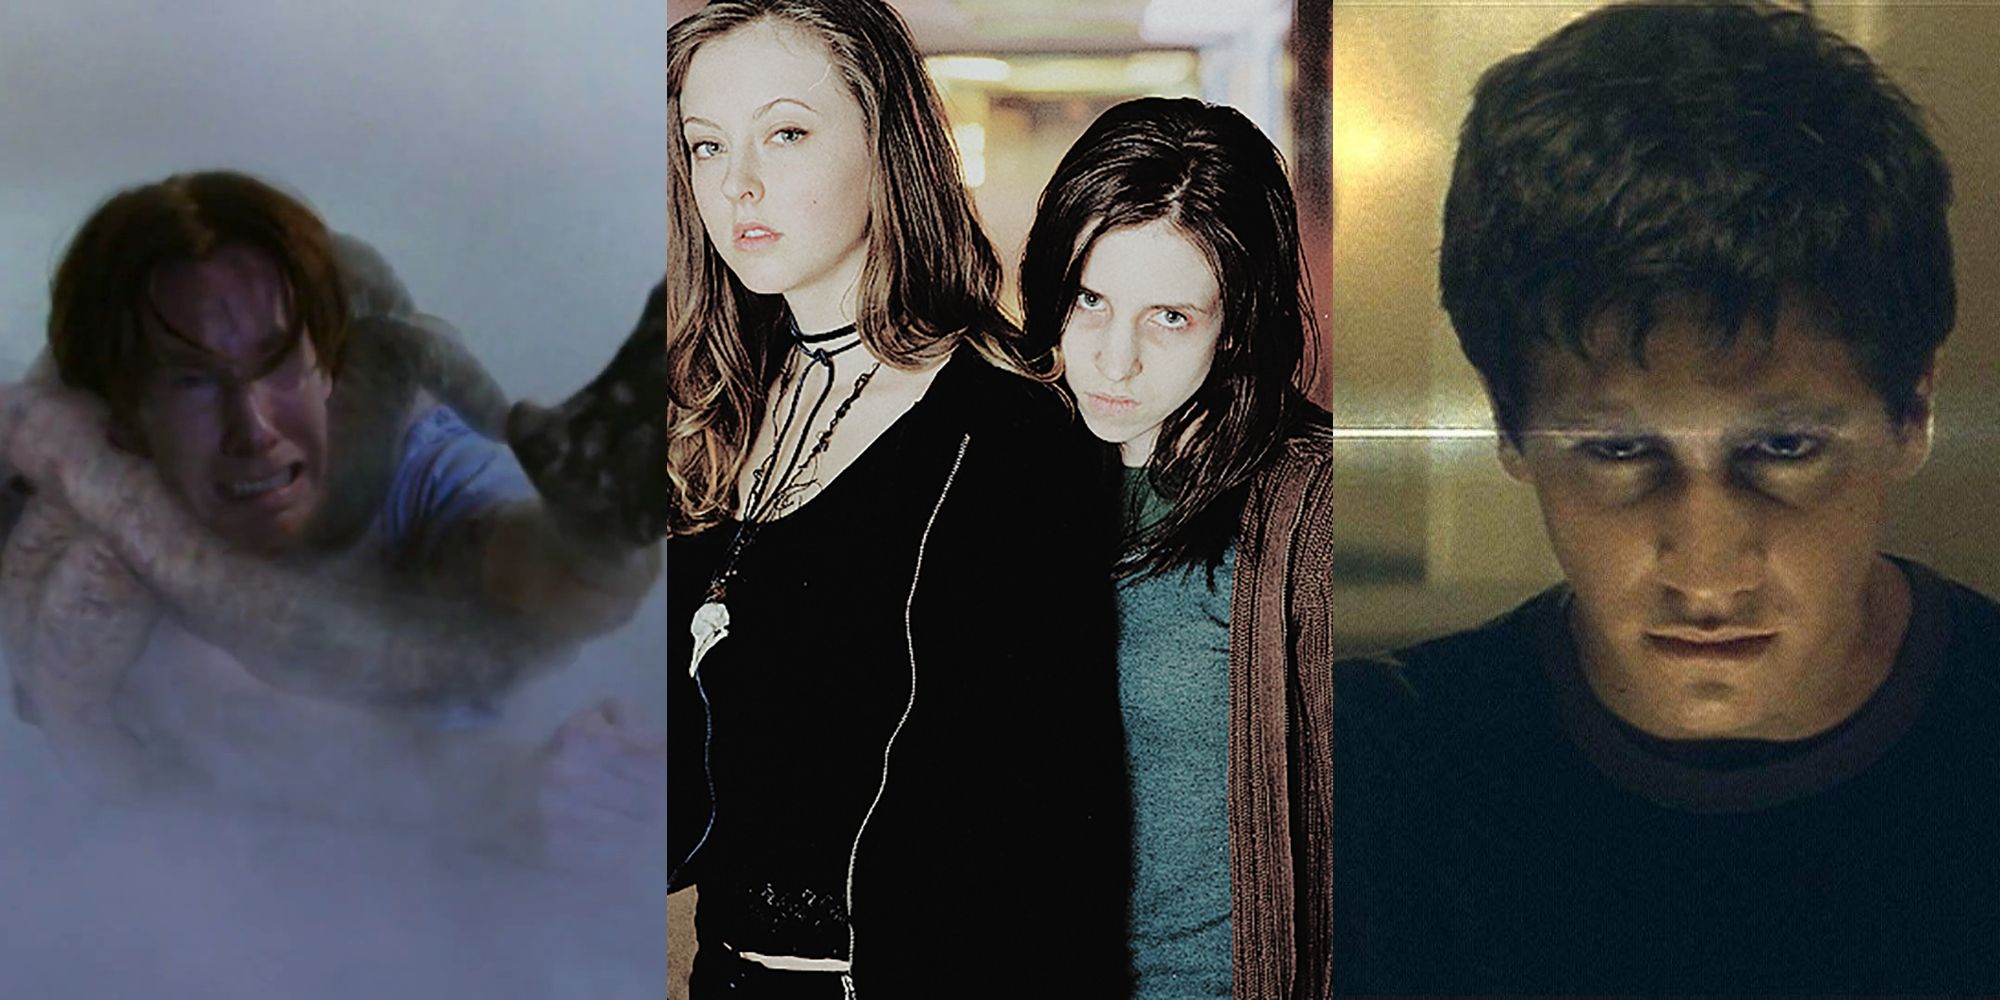 A split image of scenes from The Mist, Ginger Snaps, and Donnie Darko